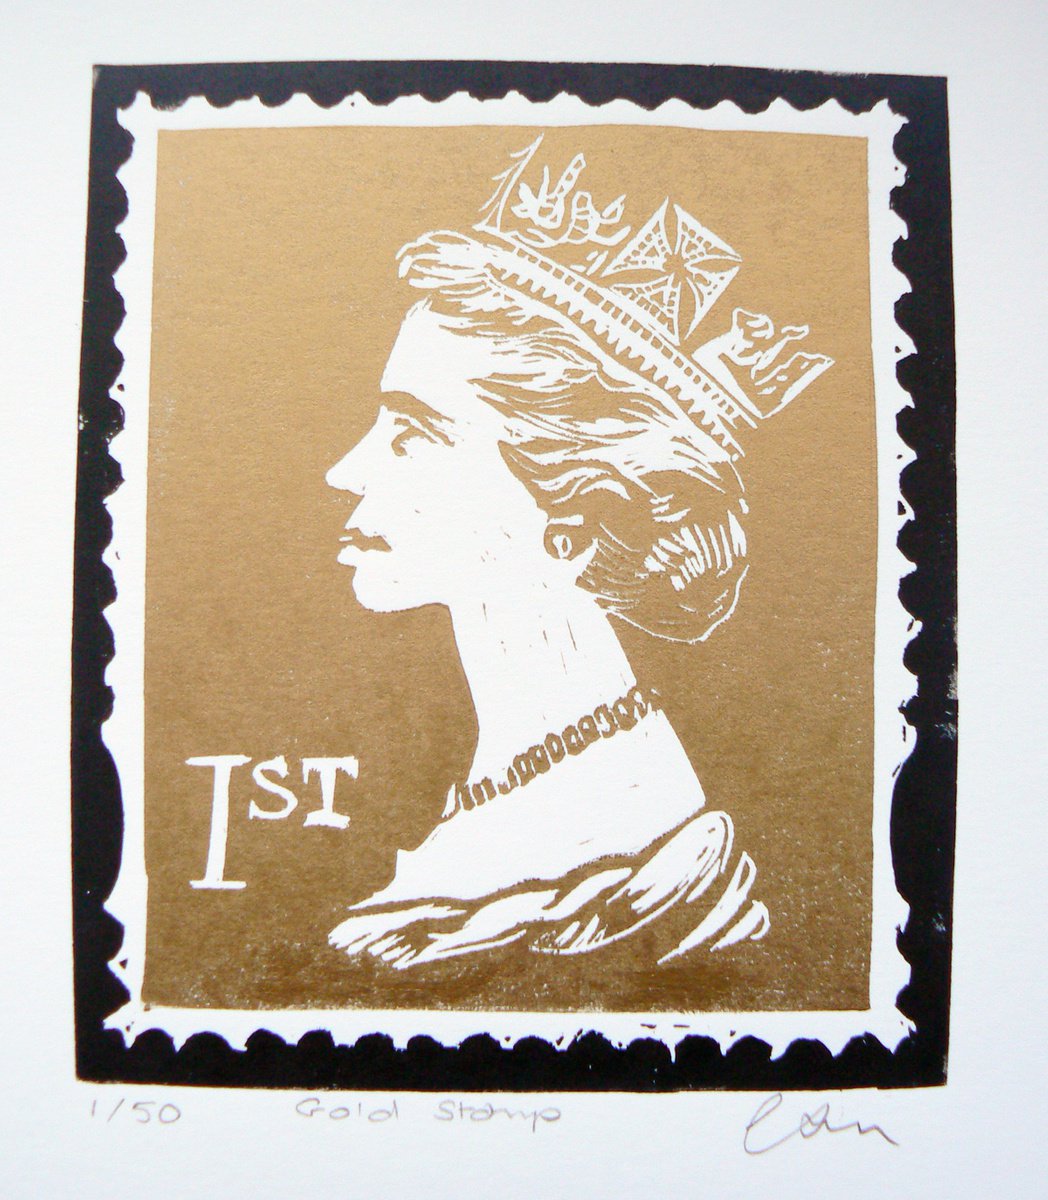 Gold stamp (linocut print of a first class stamp in gold ink) by Carolynne Coulson